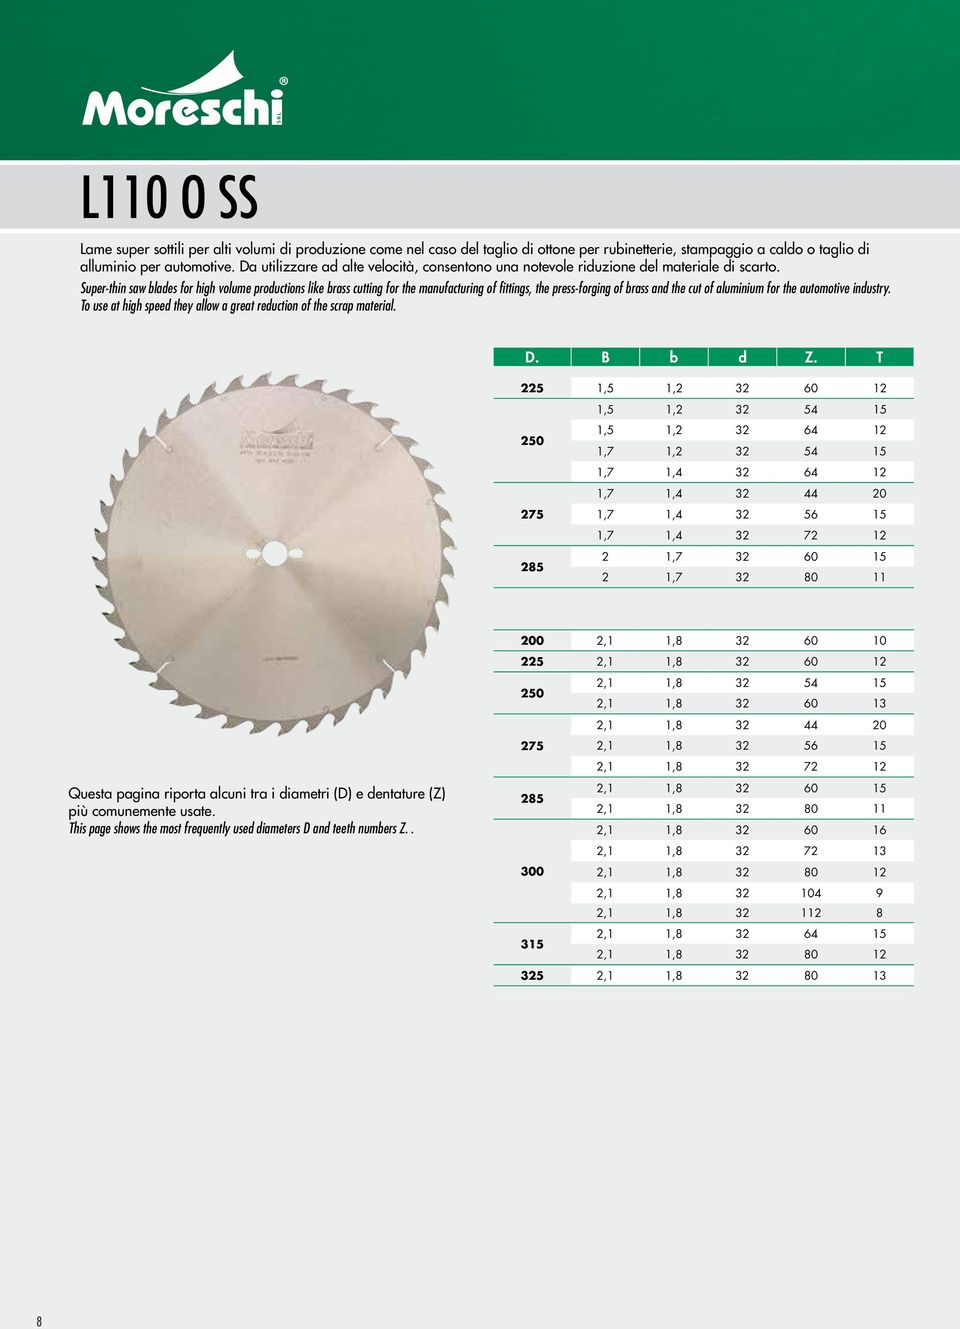 Super-thin saw blades for high volume productions like brass cutting for the manufacturing of fittings, the press-forging of brass and the cut of aluminium for the automotive industry.